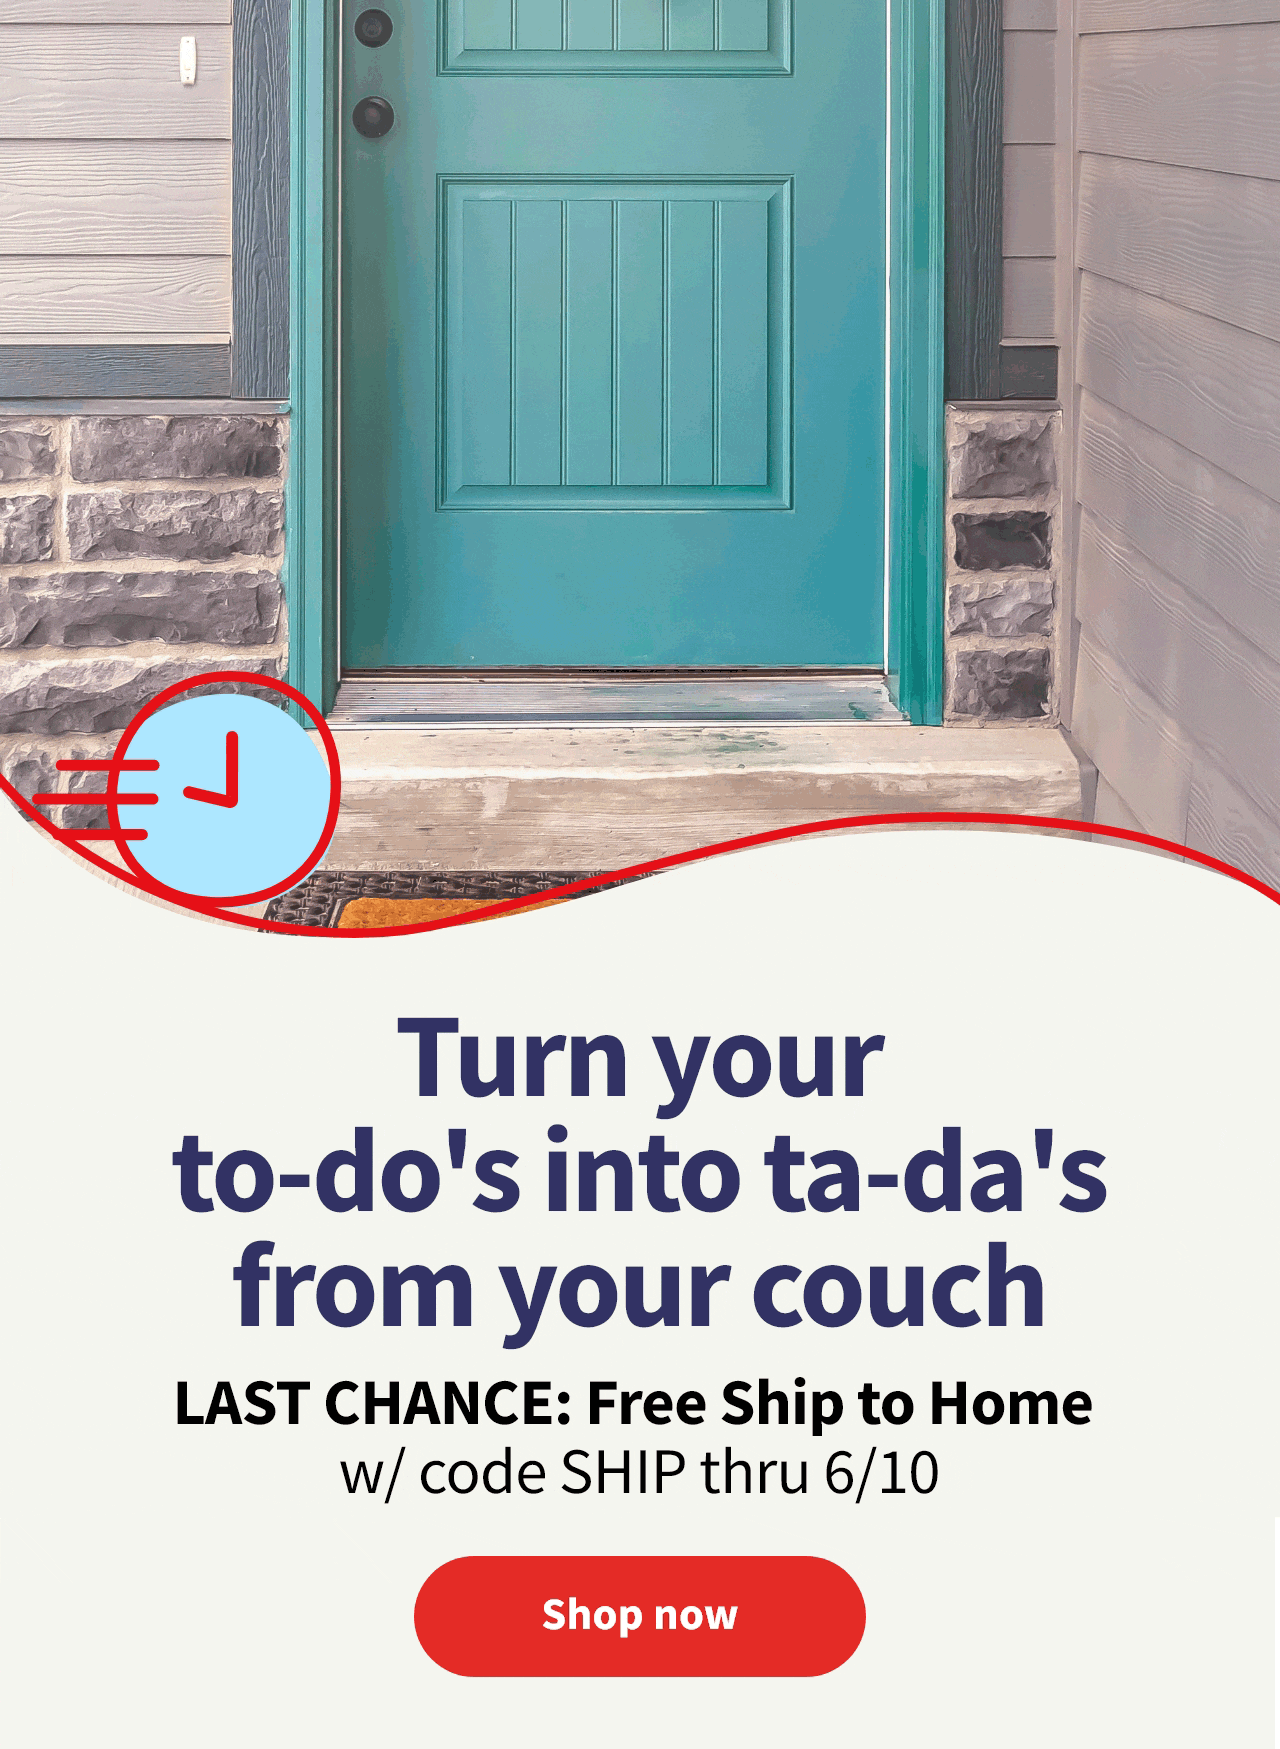 Turn your to-dos into ta-das from your couch. LAST CHANCE: Free Ship to Home w/ code SHIP thru 6/10. Shop now  Turn your to-do's into ta-da's from your couch LAST CHANCE: Free Ship to Home w code SHIP thru 610 